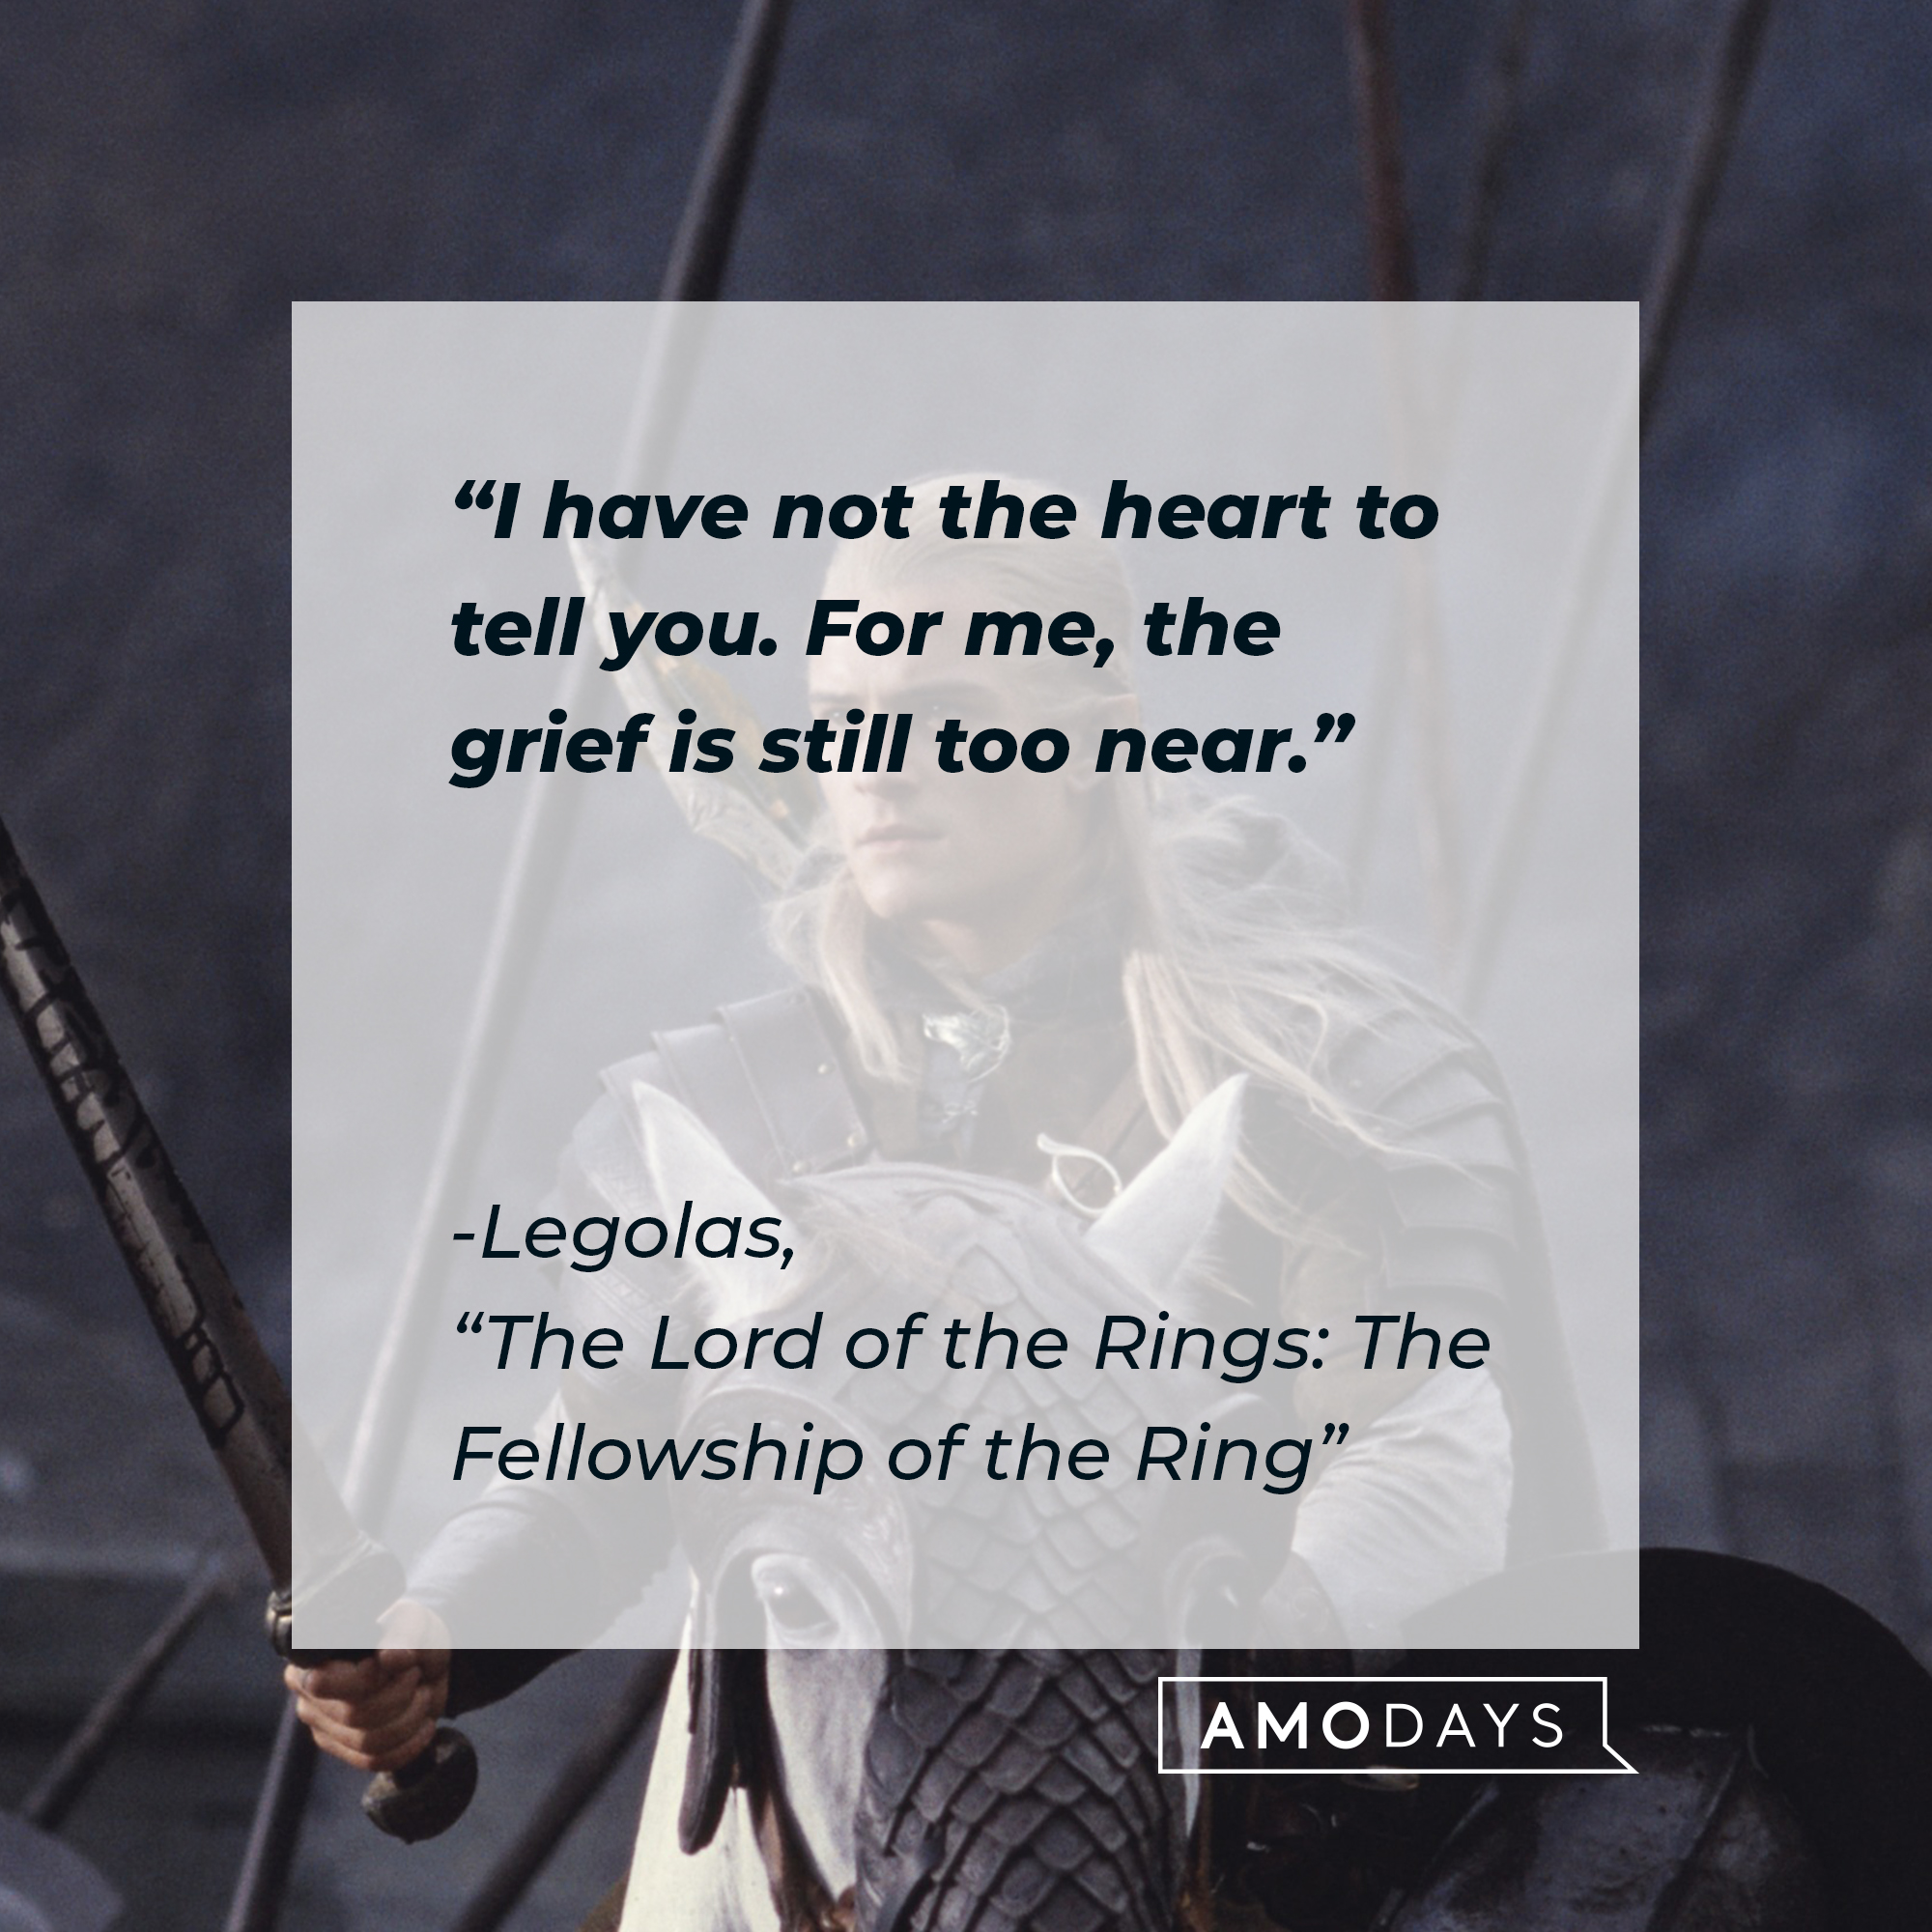 Legolas with his quote: "I have not the heart to tell you. For me, the grief is still too near."  | Source: Facebook.com/lordoftheringstrilogy